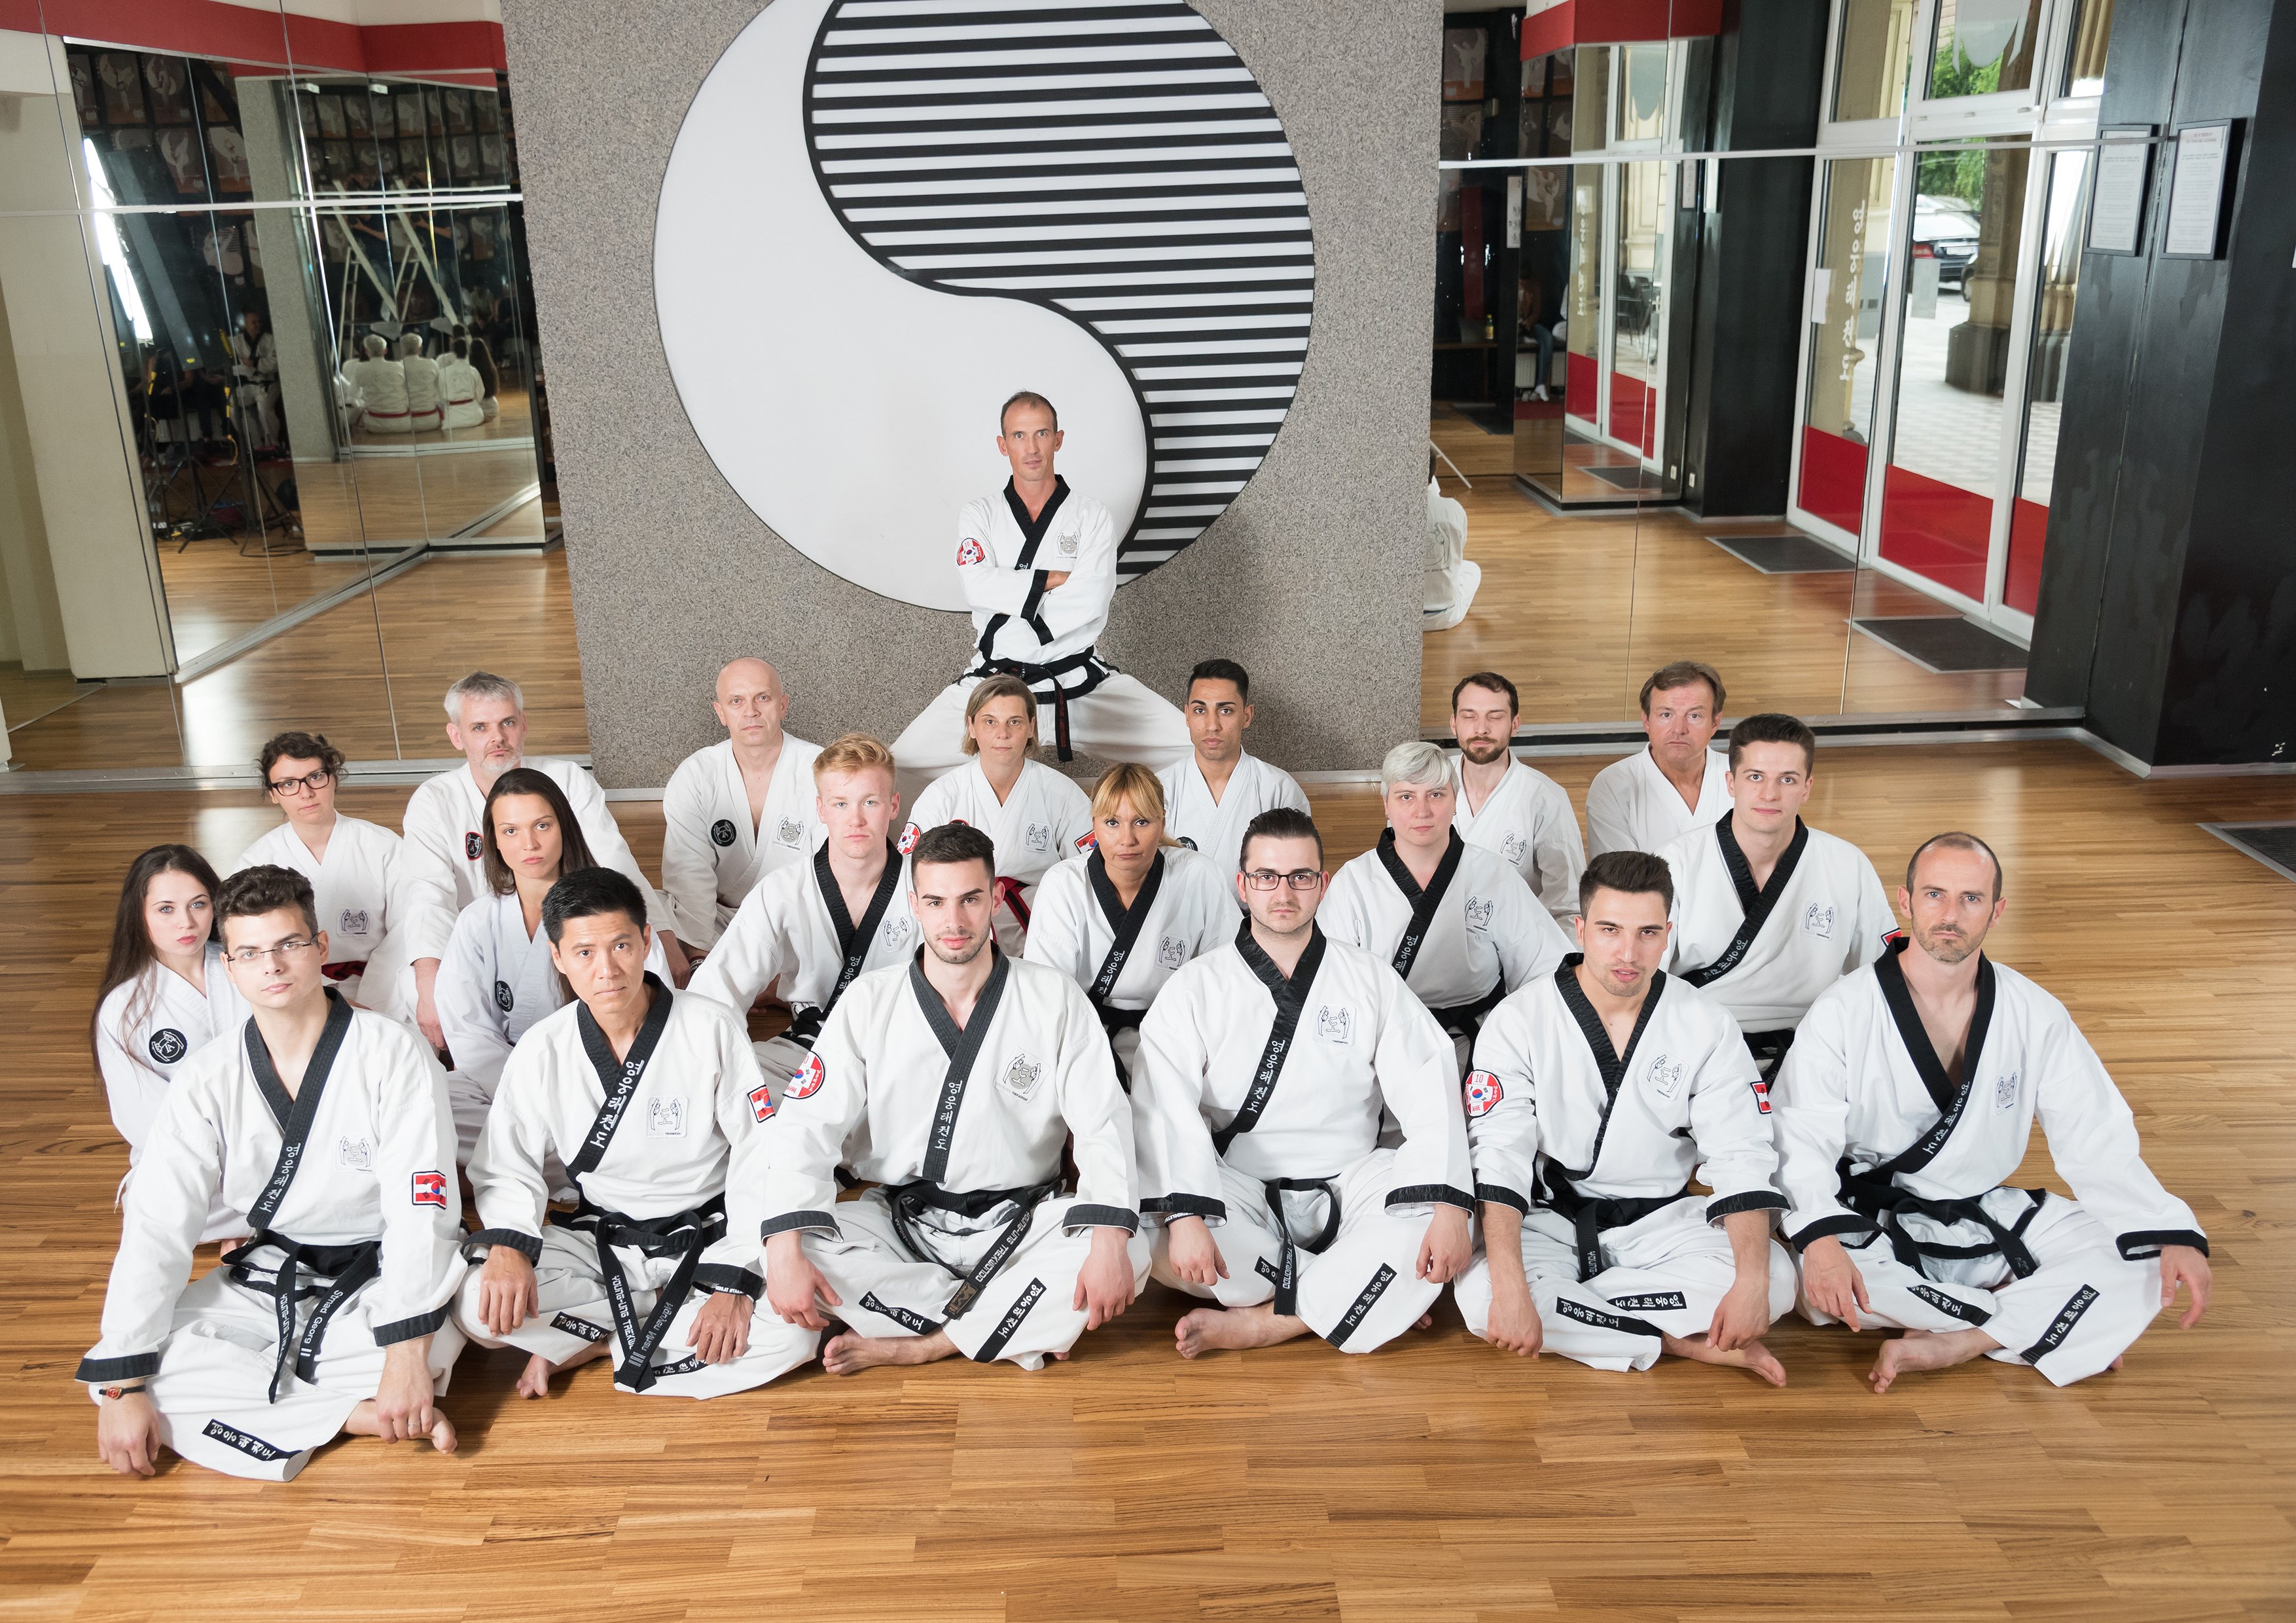 The first GO-FOR-BLACK-BELT students from various other countries have already registered!